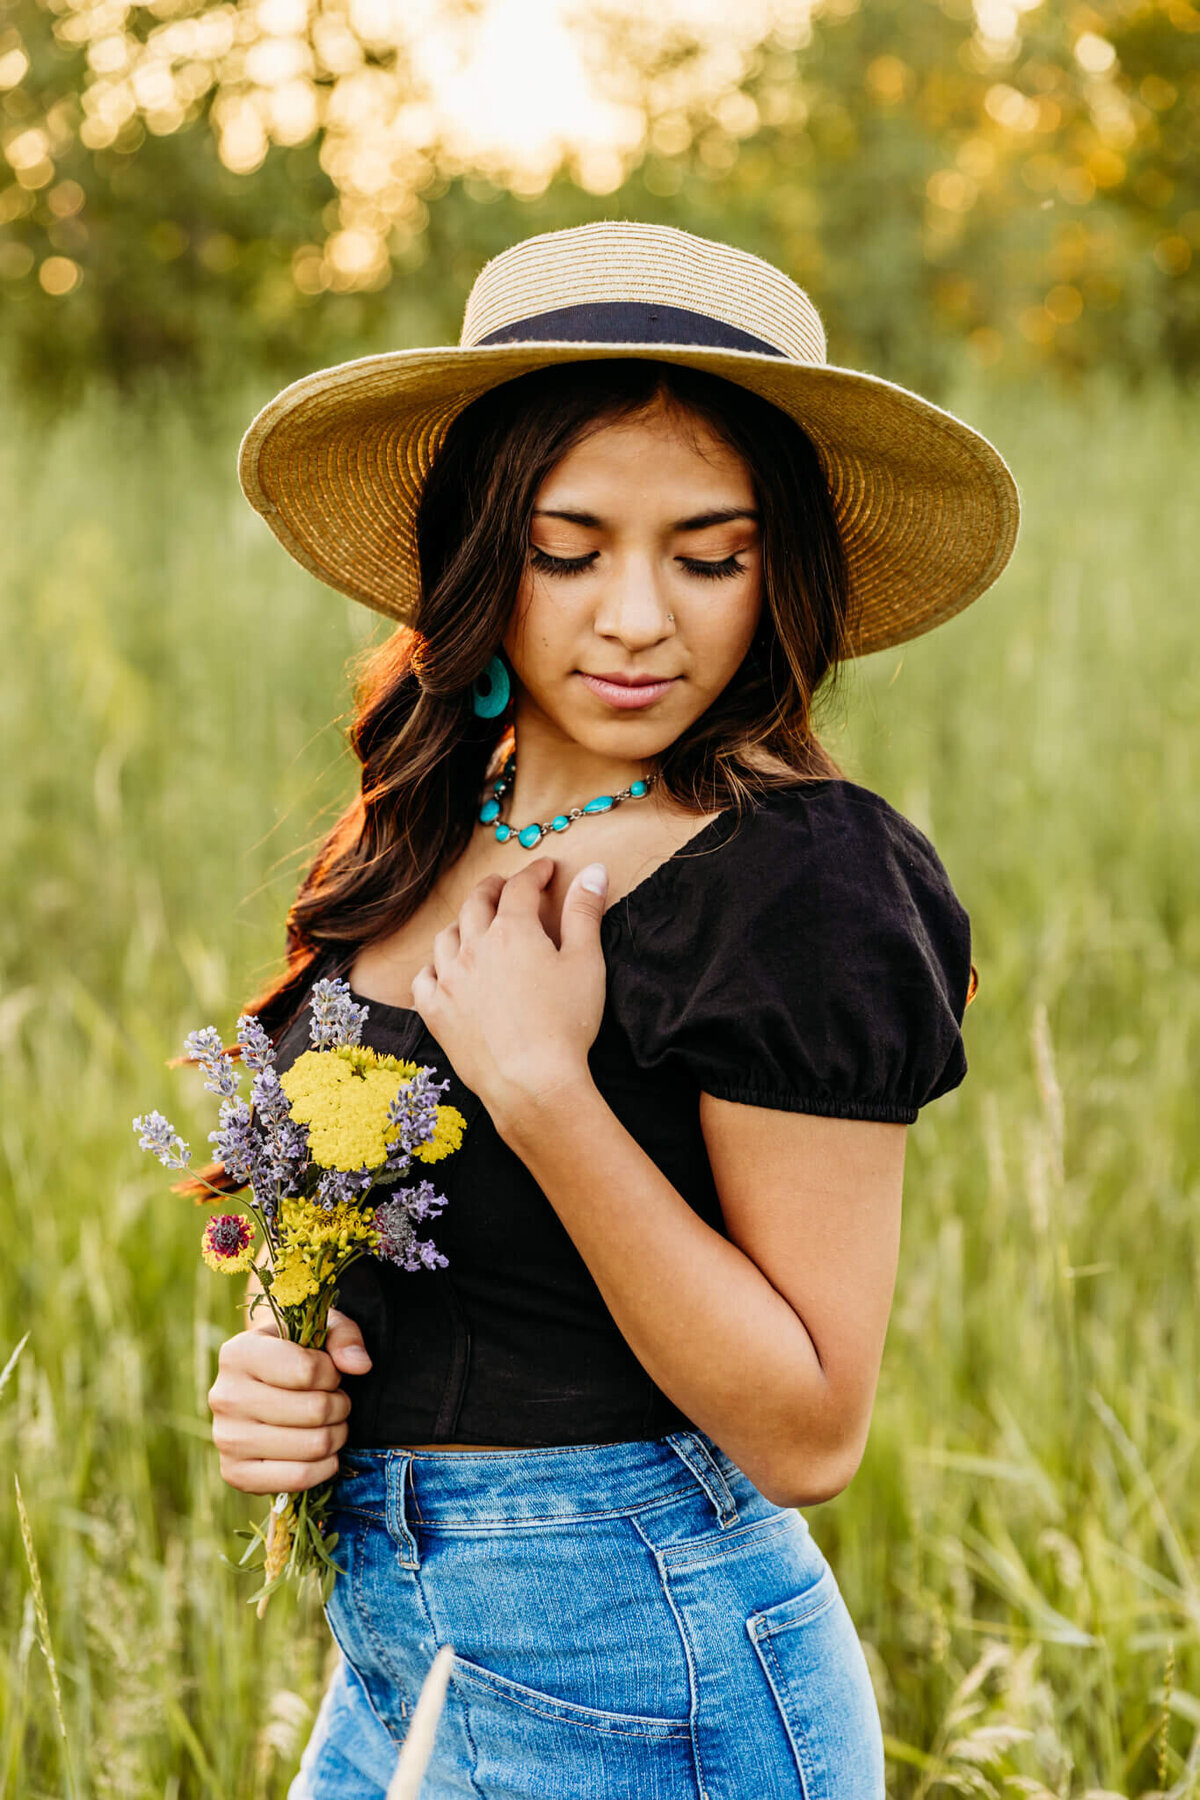 gorgeous portrait of a high school senior glancing down and touching her necklace while wearing a sun hat